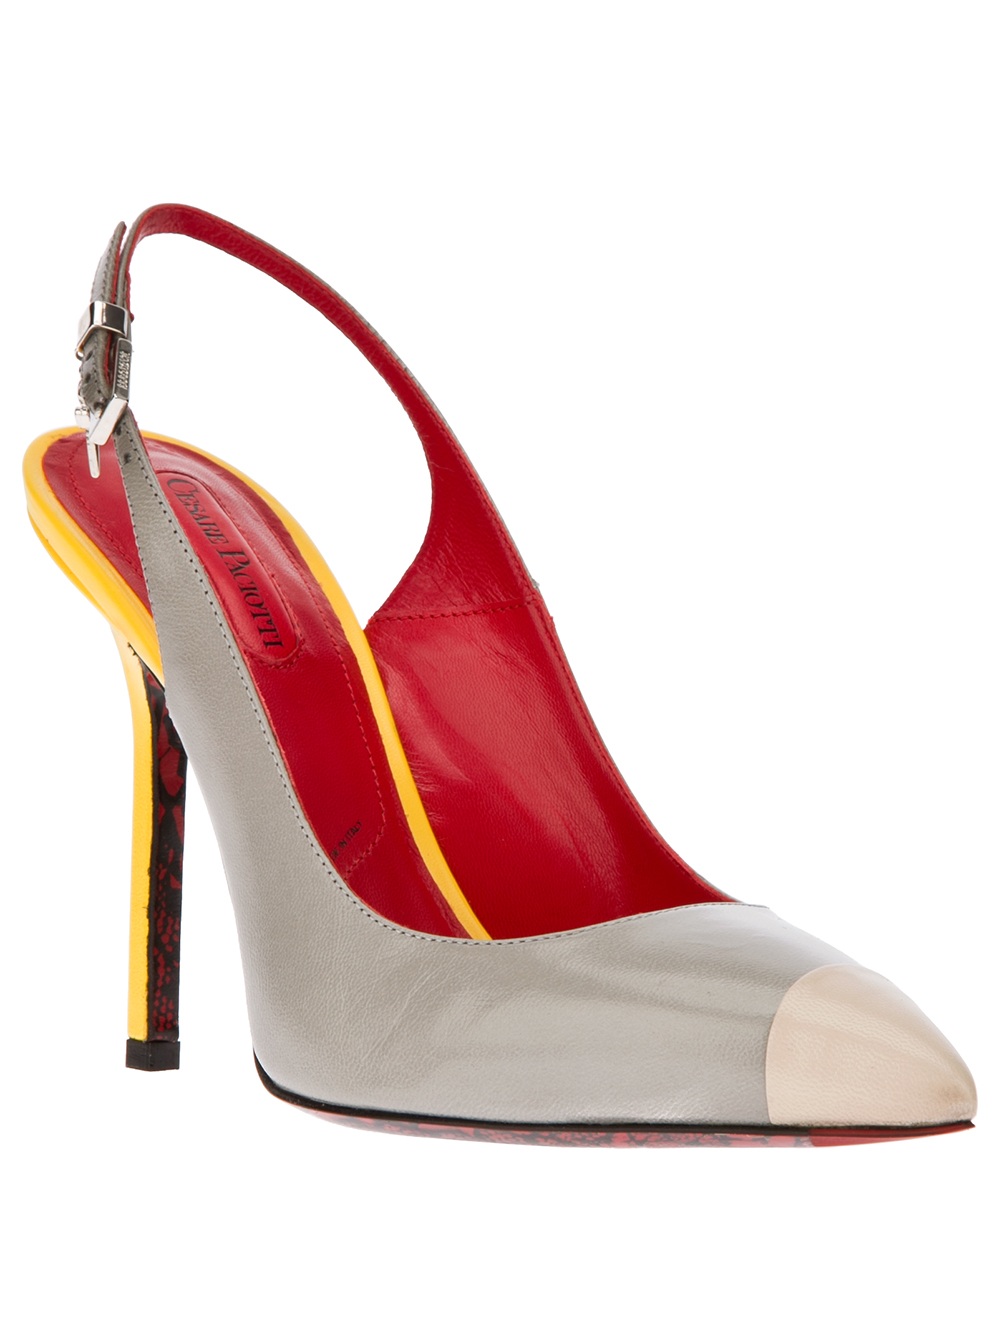 Lyst - Cesare paciotti Sling Back Patent Pump in Gray